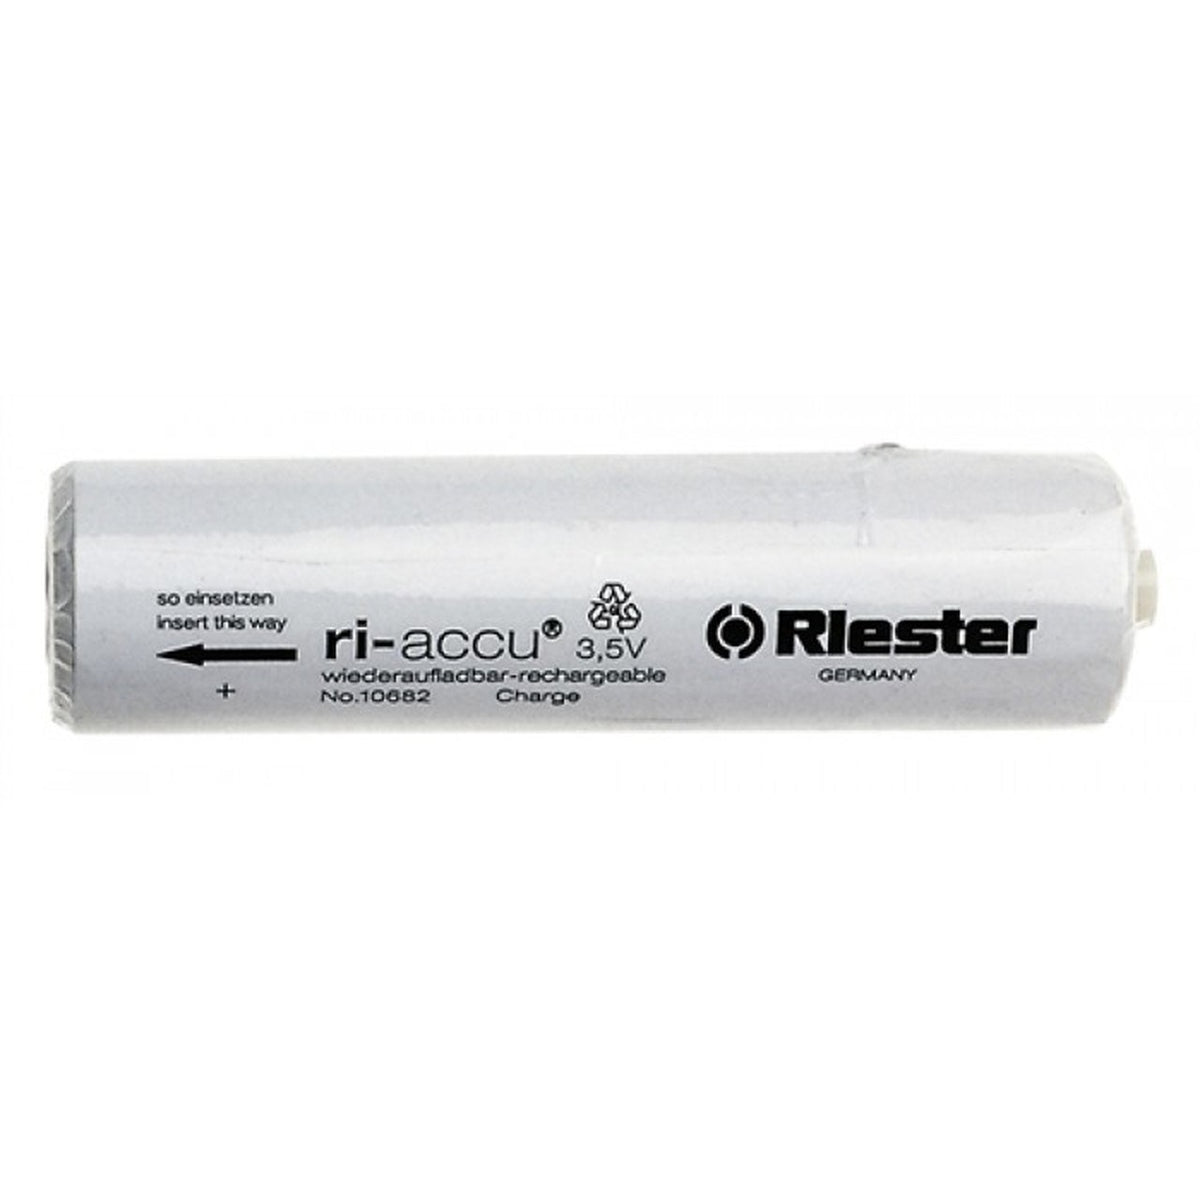 Riester Rechargeable C Type Battery